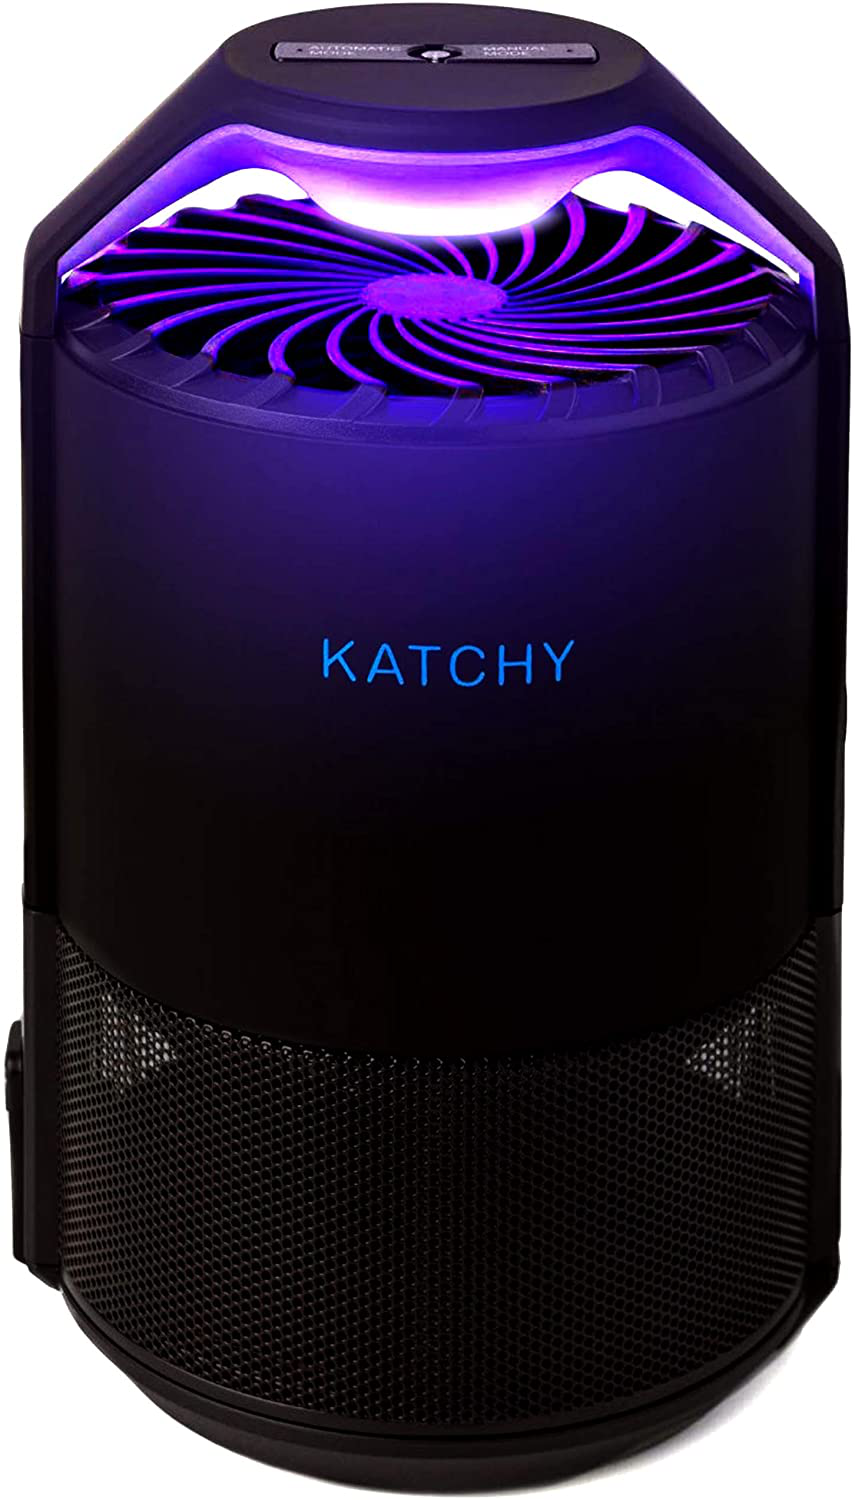 KATCHY Automatic Indoor Insect and Flying Bugs Trap, Fruit Fly Gnat Mosquito Killer with UV Light Fan, Sticky Glue Boards, No Zapper, Light Sensor (Black)